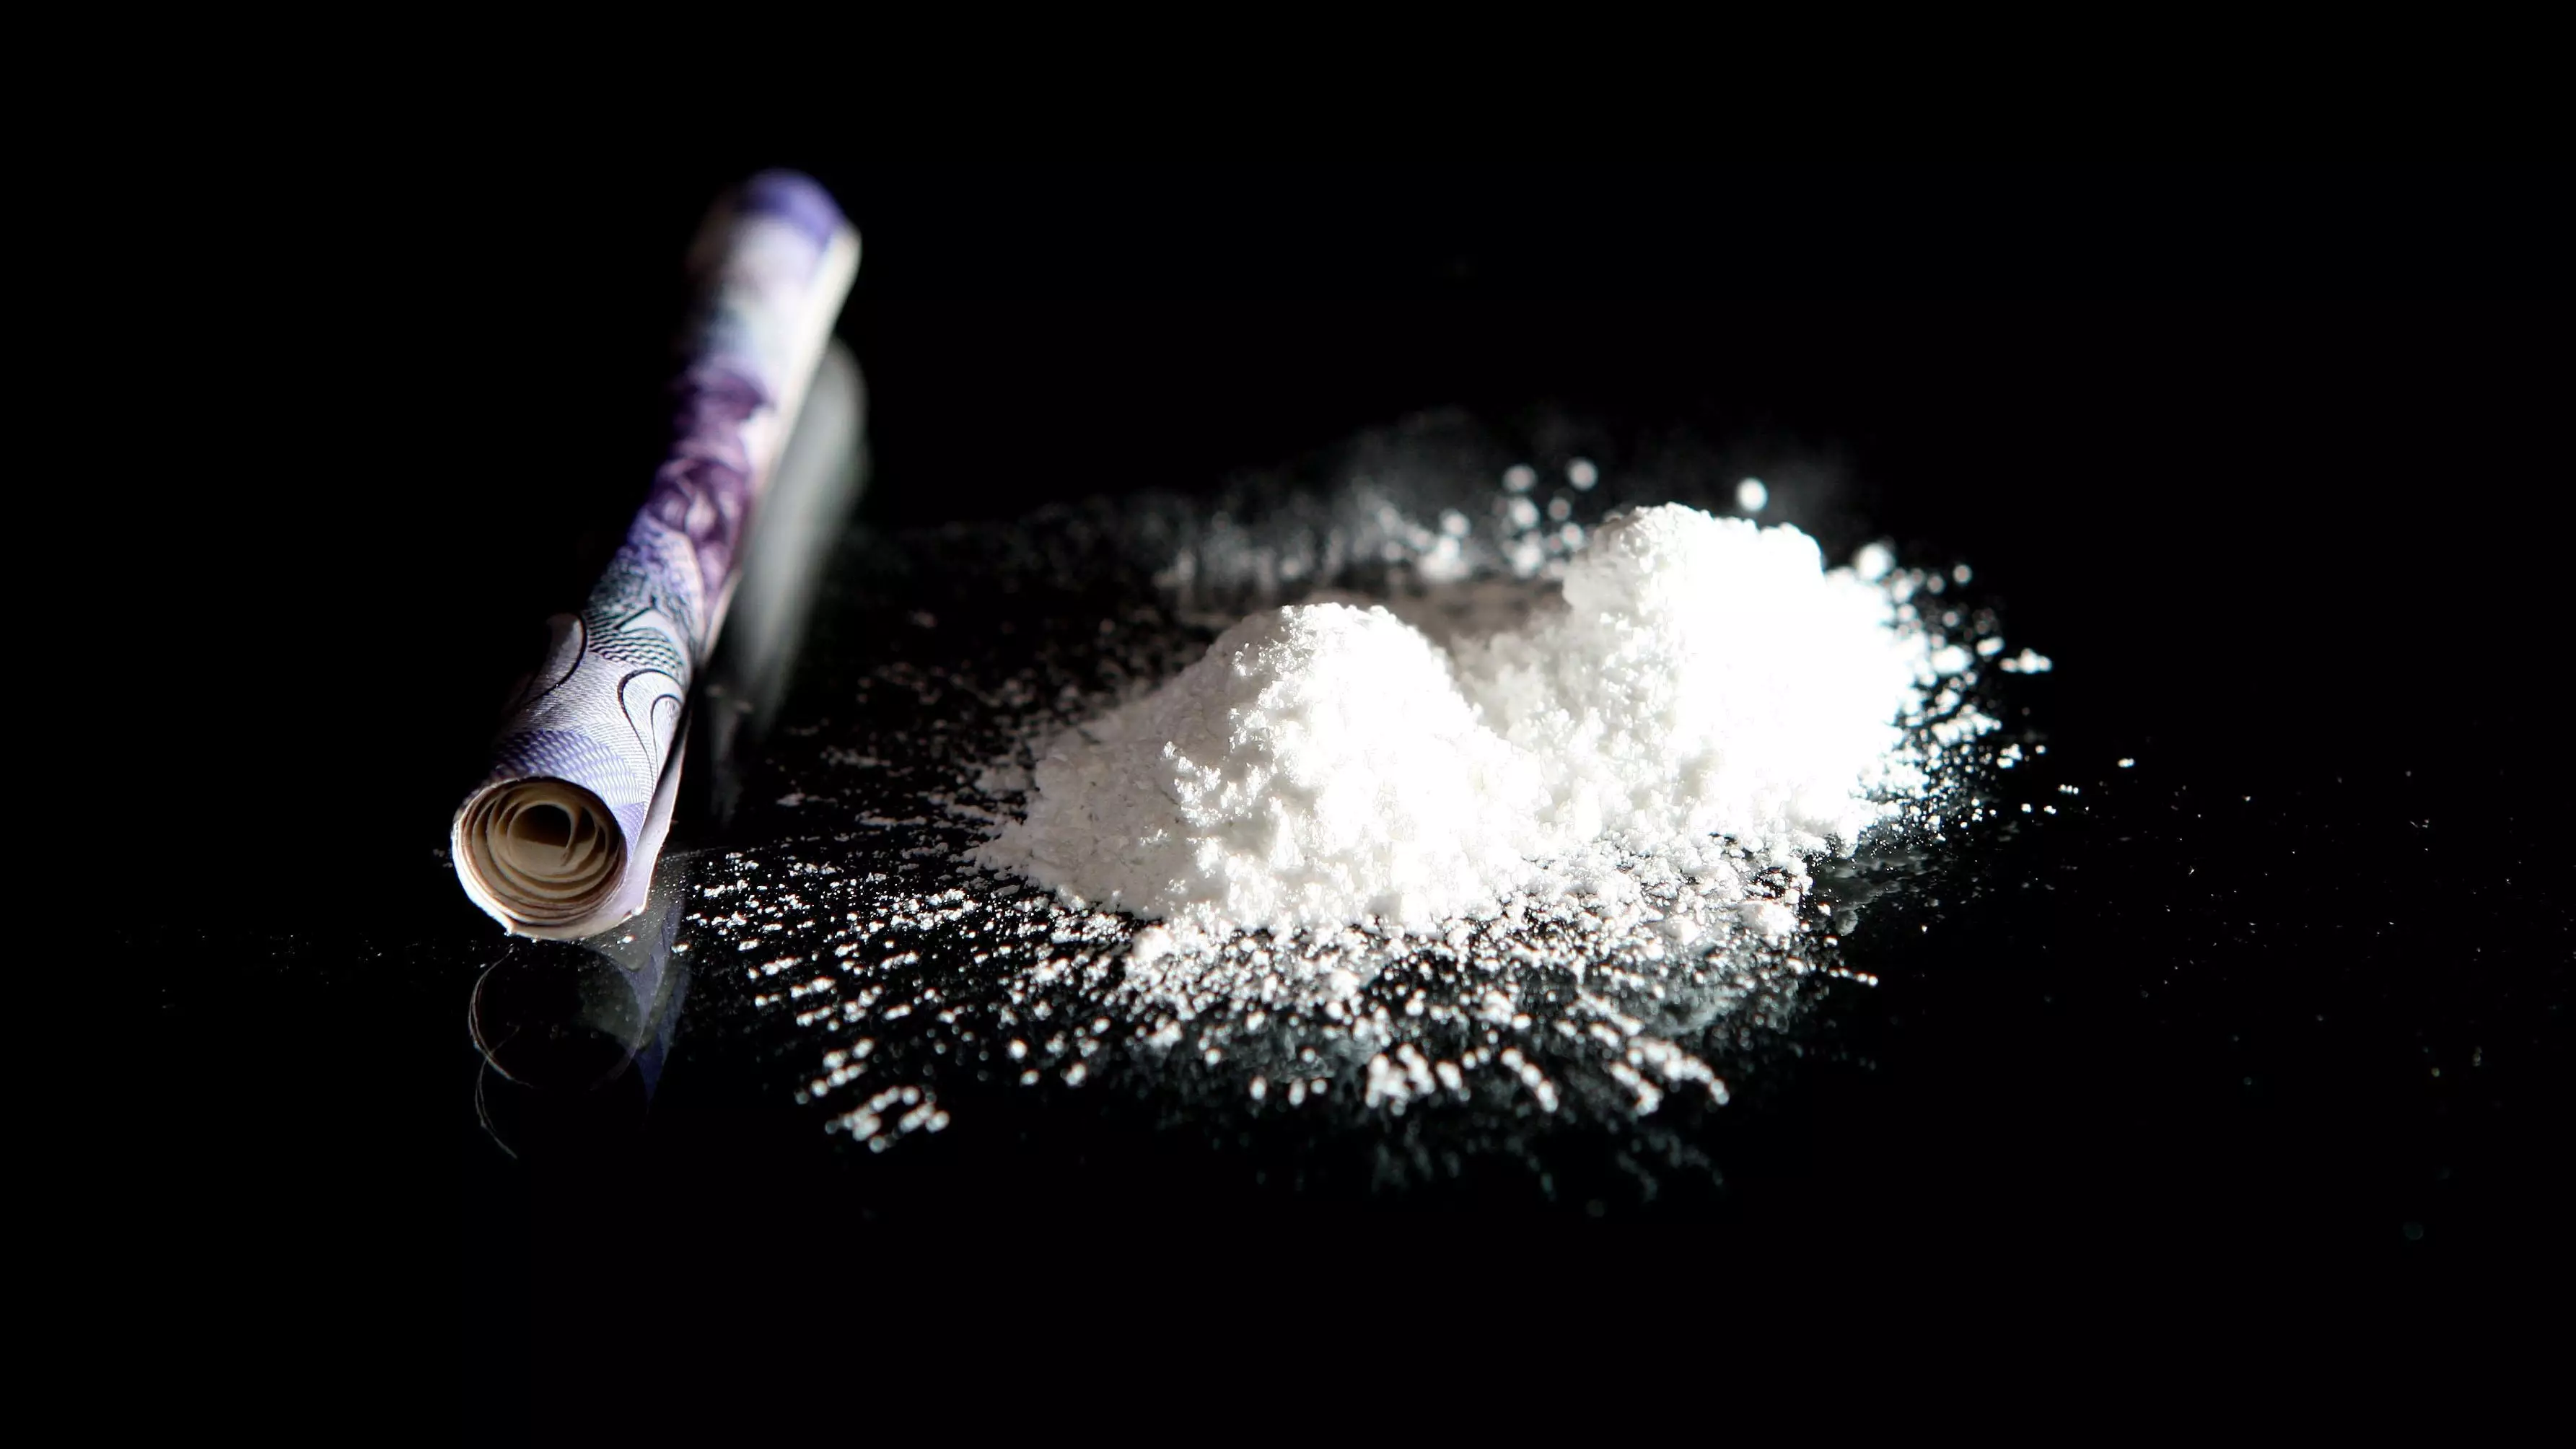 People In The UK Use More Cocaine Than Anywhere Else In Europe